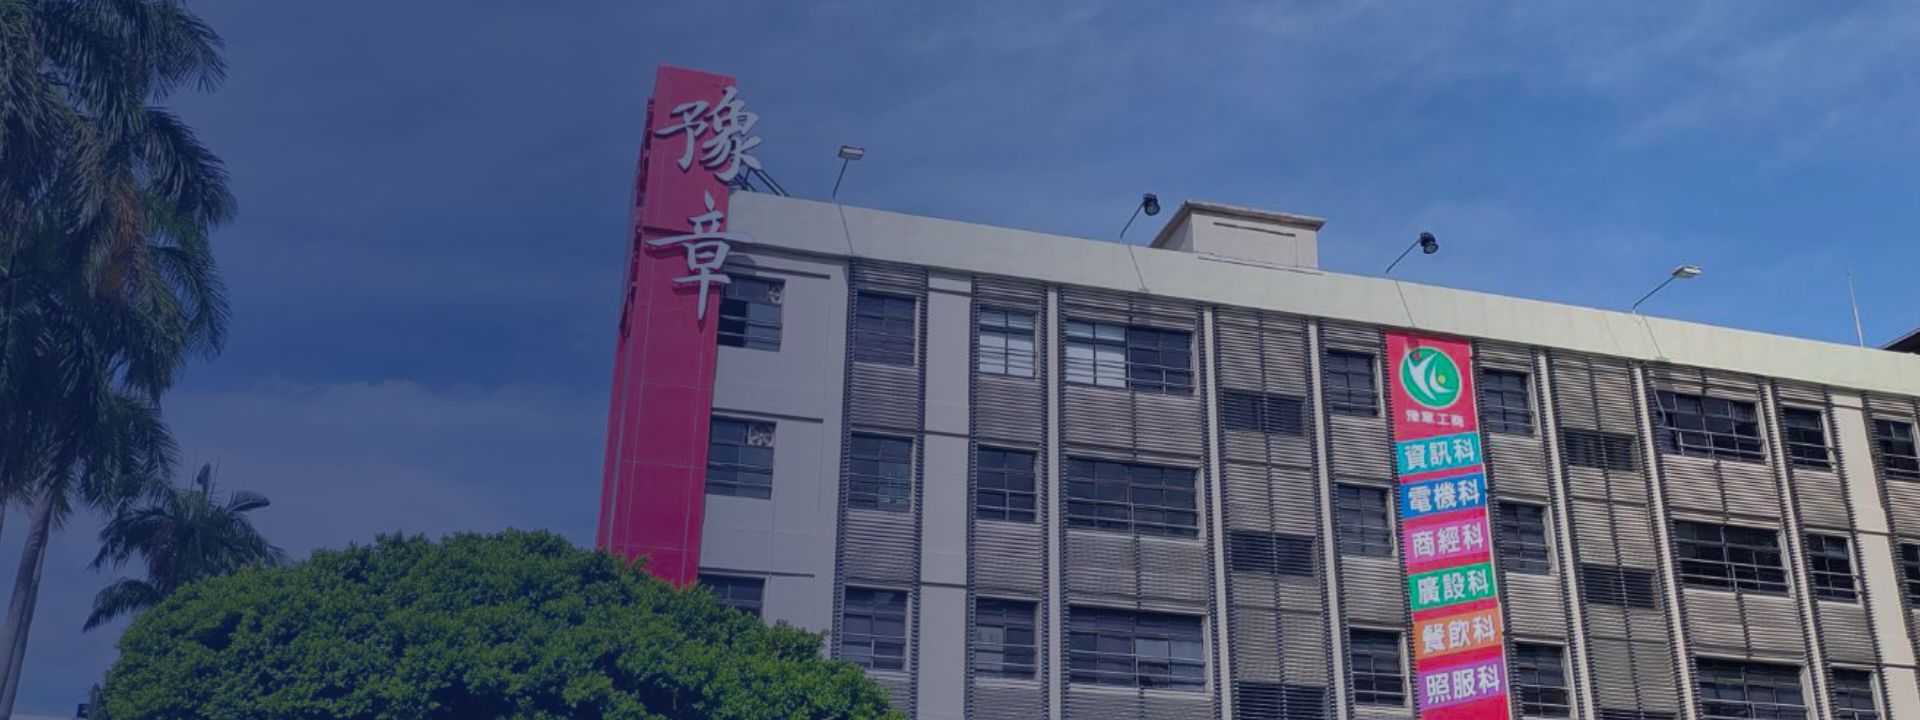 Private Yu-Chang Technical Commercial Vocational High School